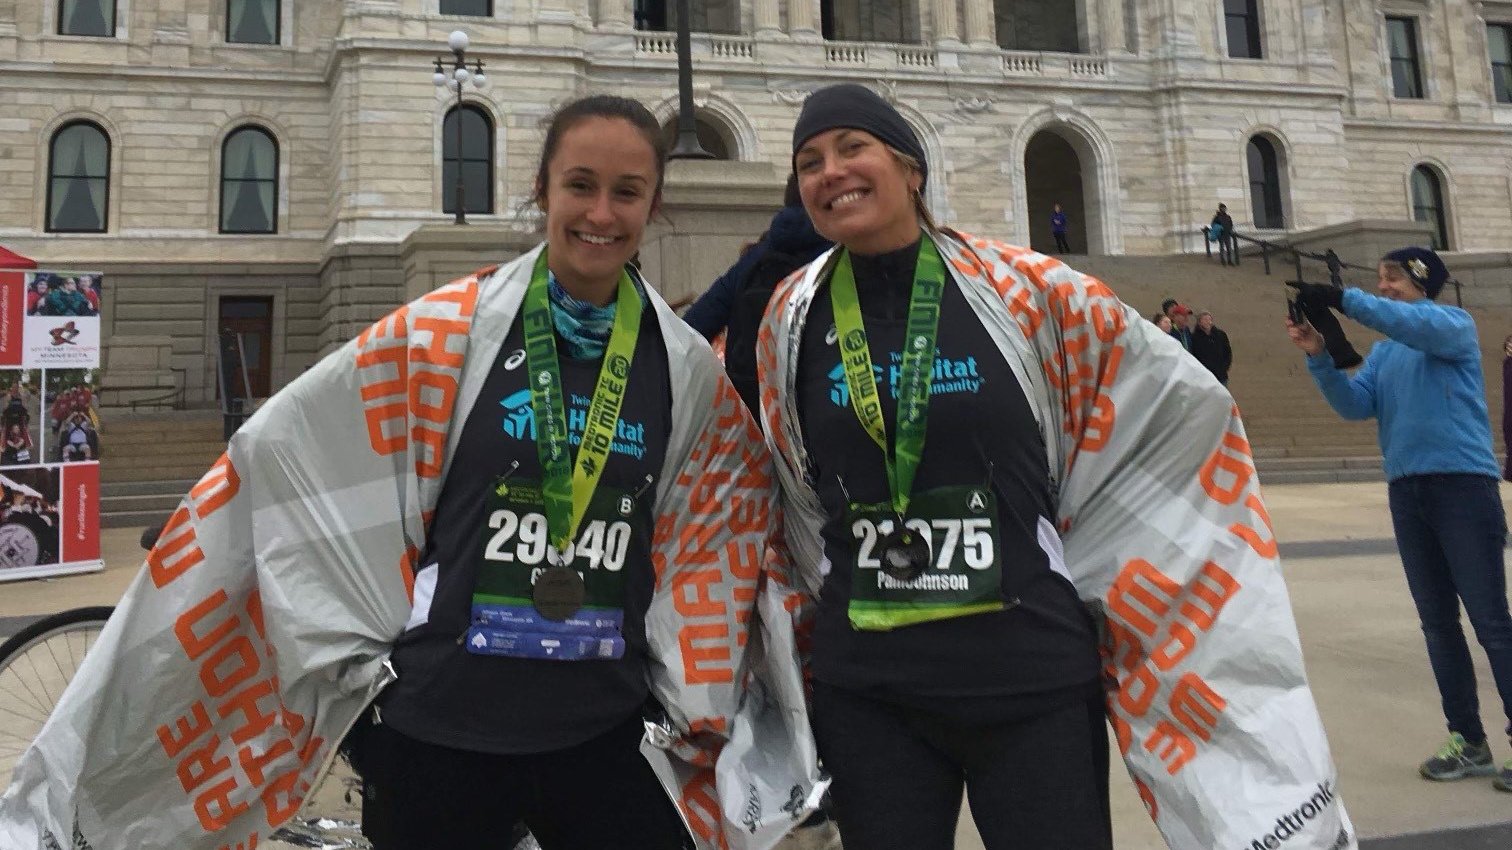 Pam and Gracia at the 2019 Twin Cities Marathon.